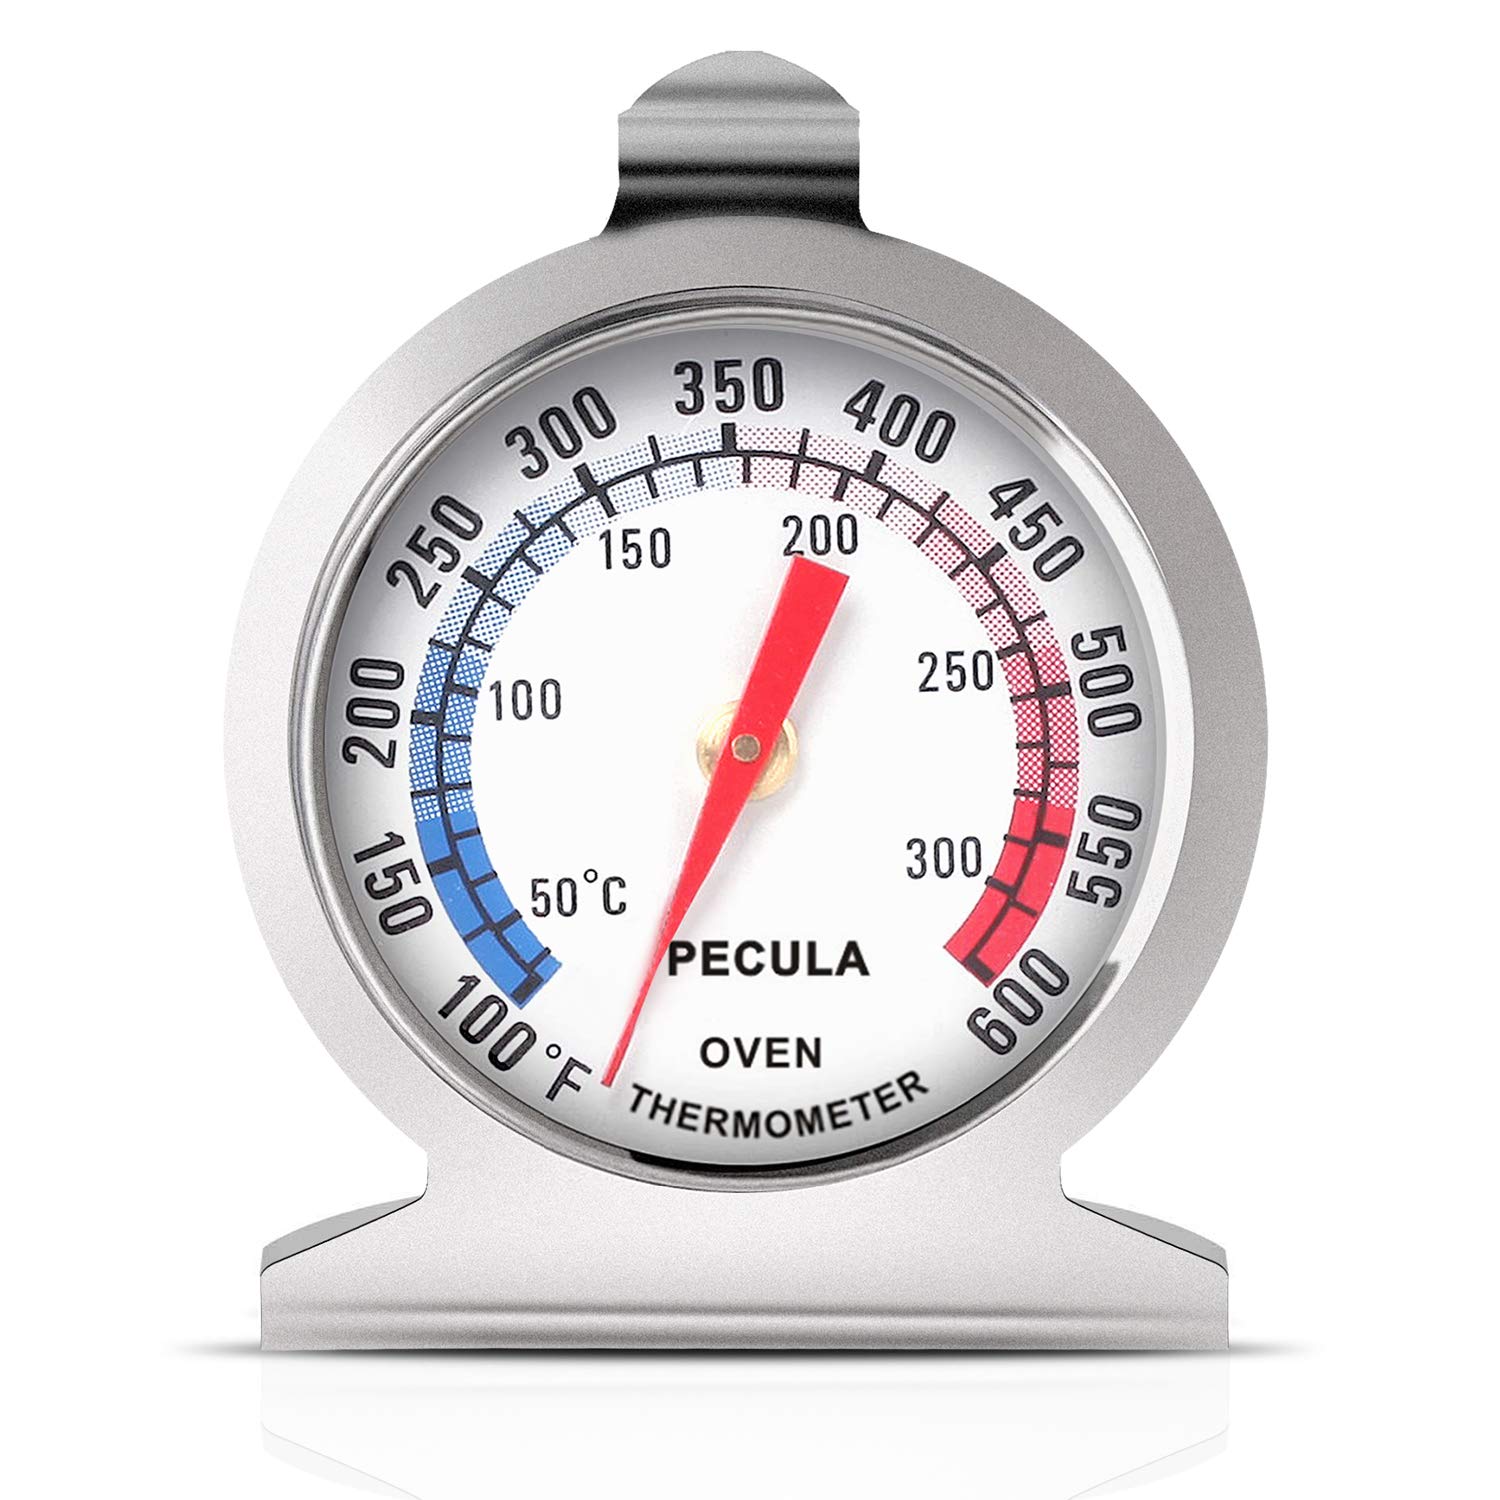 oven thermometer product review